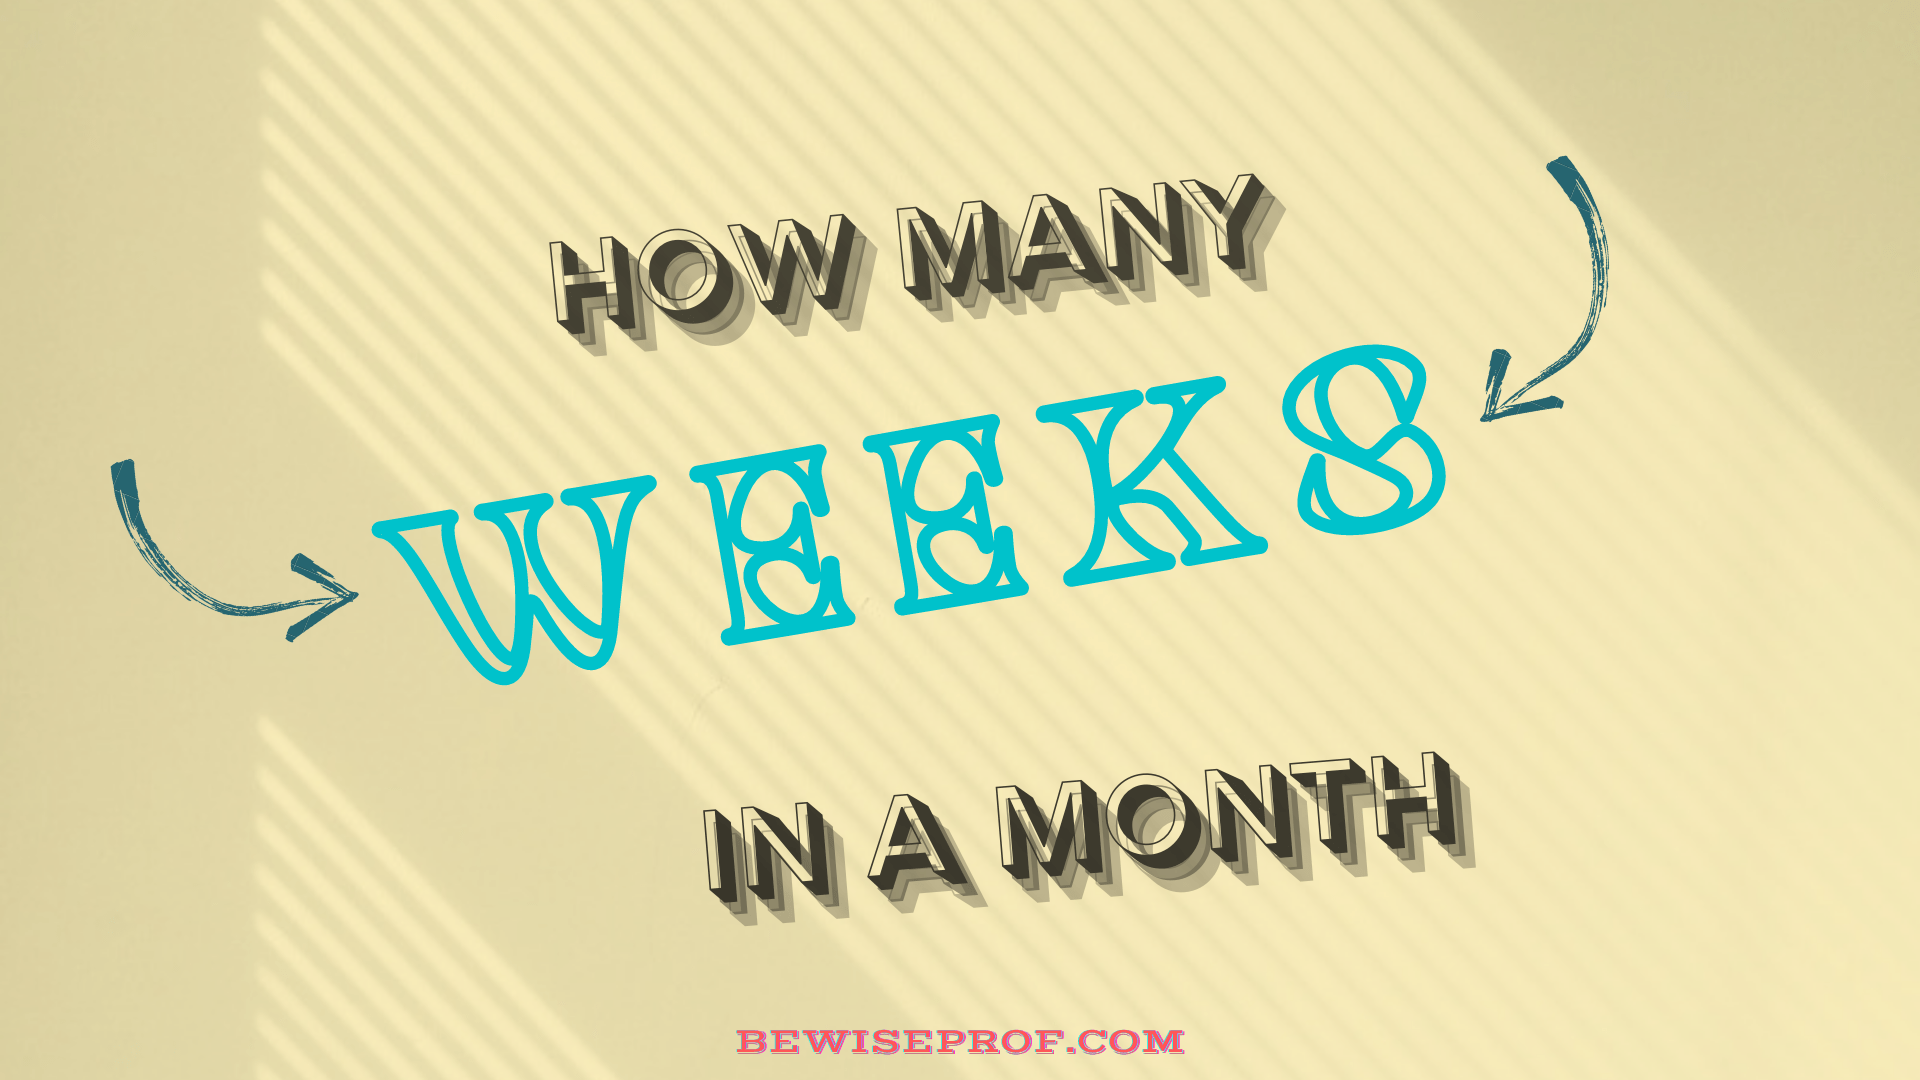 how-many-weeks-in-a-month-easy-way-to-calculate-it-be-wise-professor